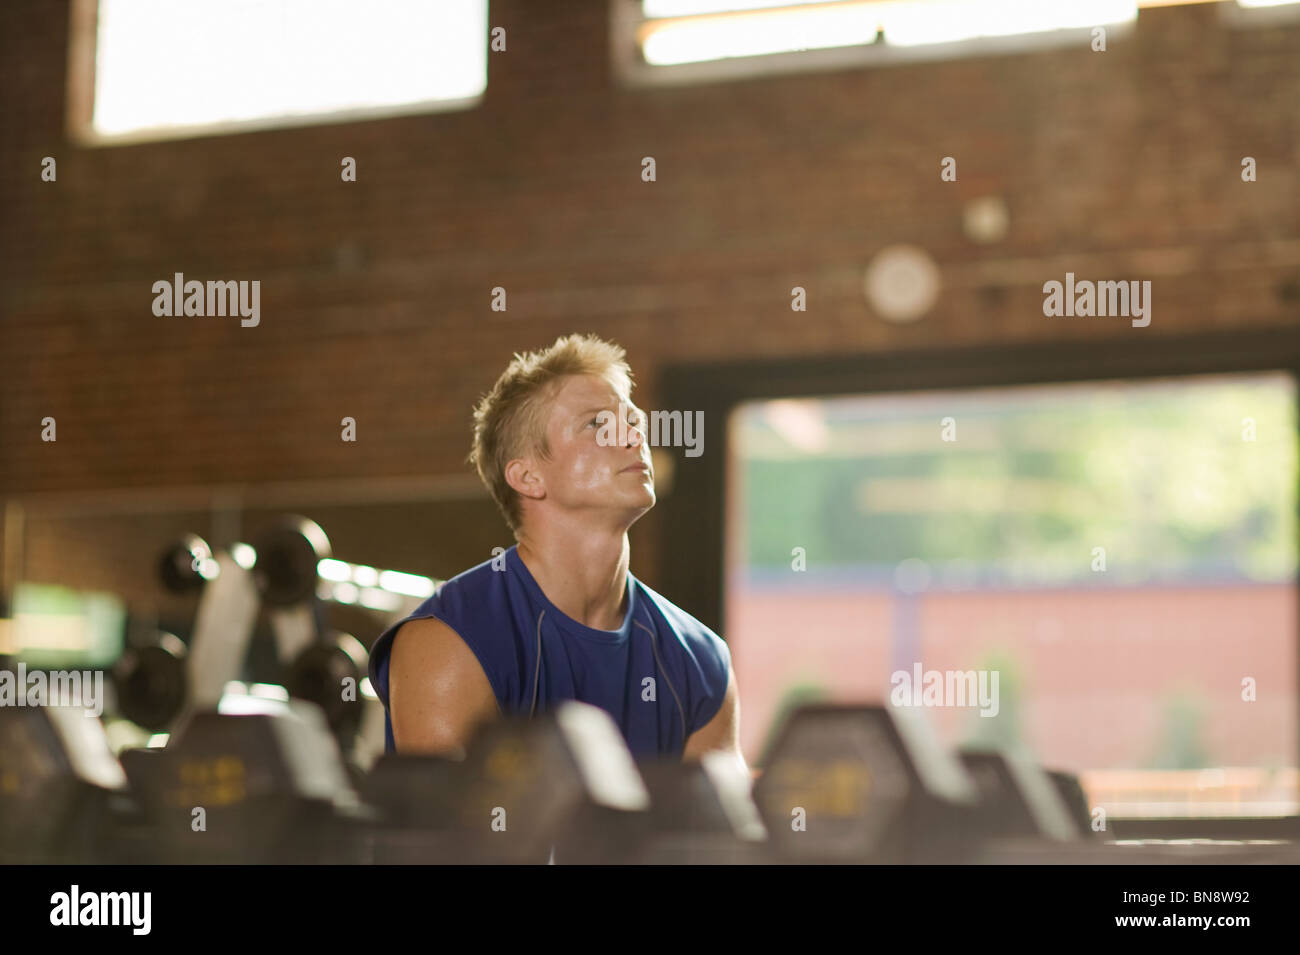 Man lifting weights in health club Stock Photo